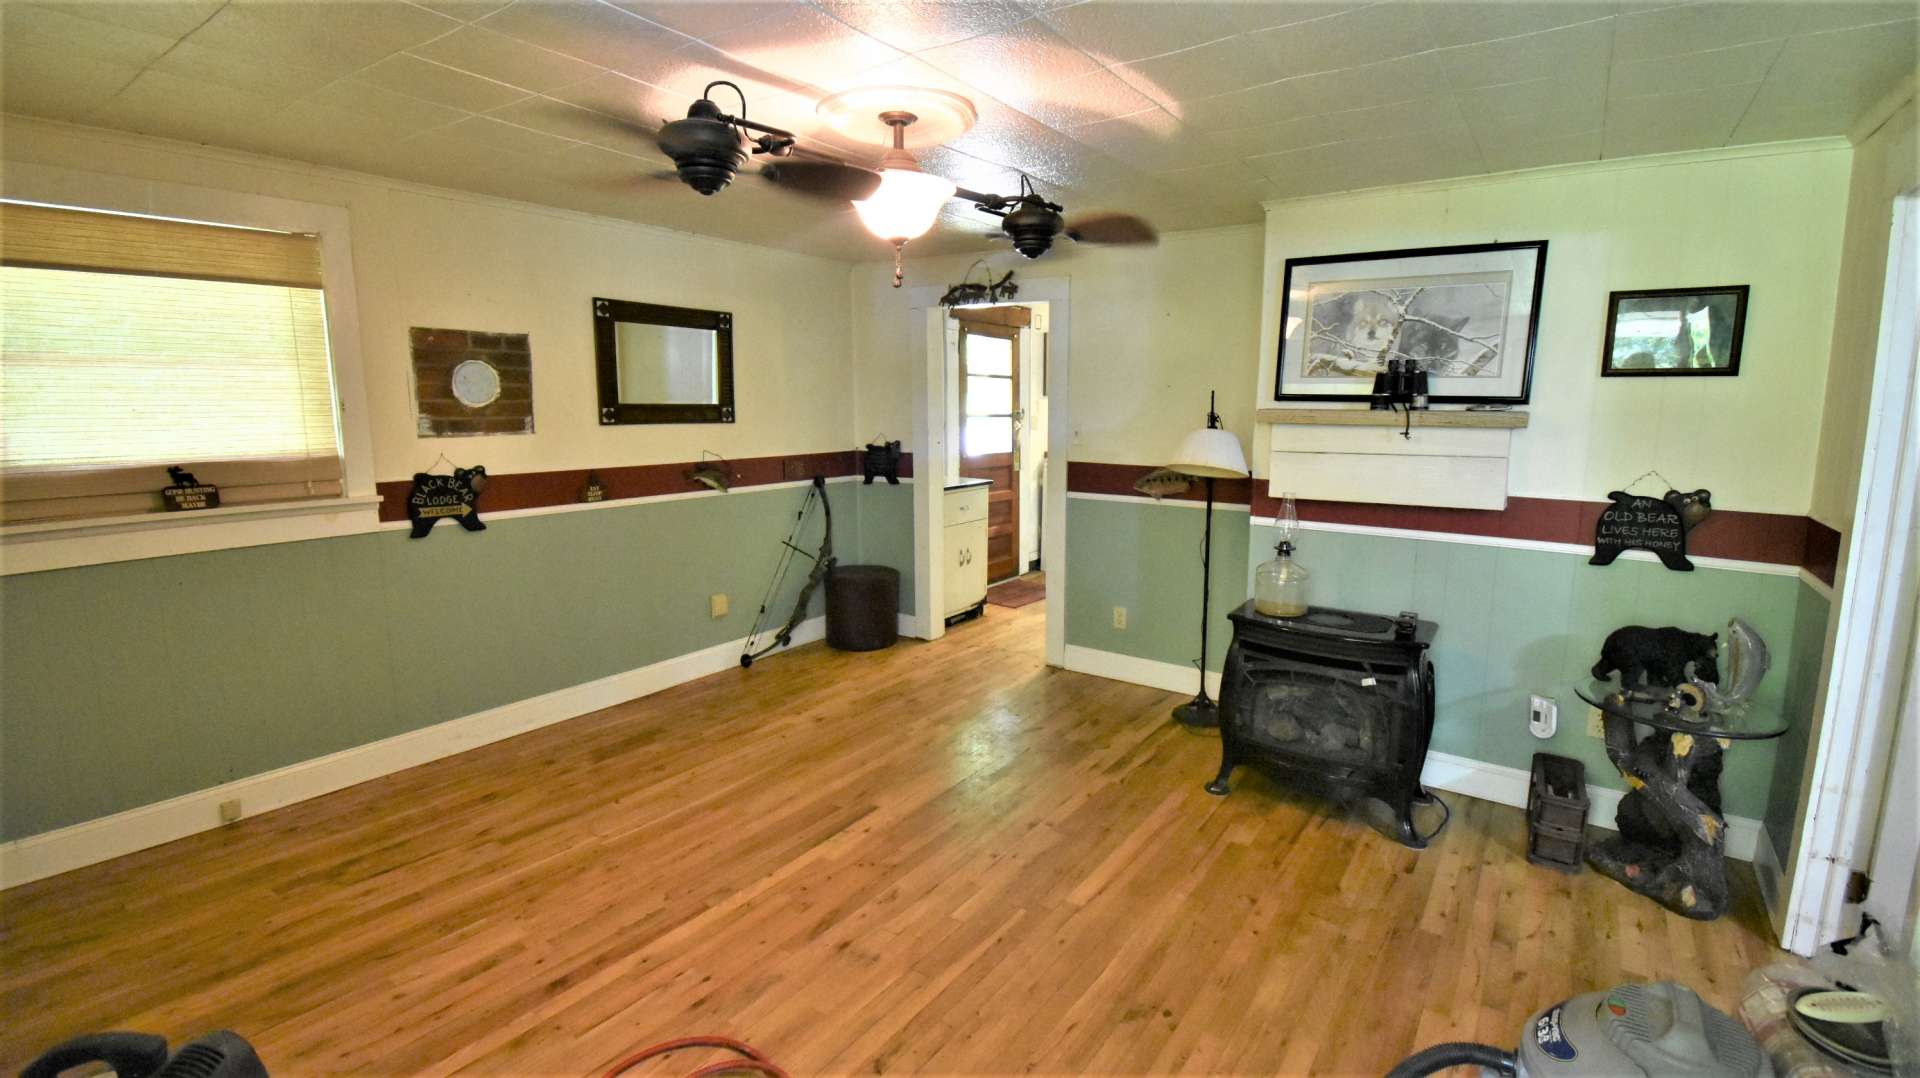 The 2 bedroom, 1 bath farmhouse can be a great little home with your vision and personal updates.